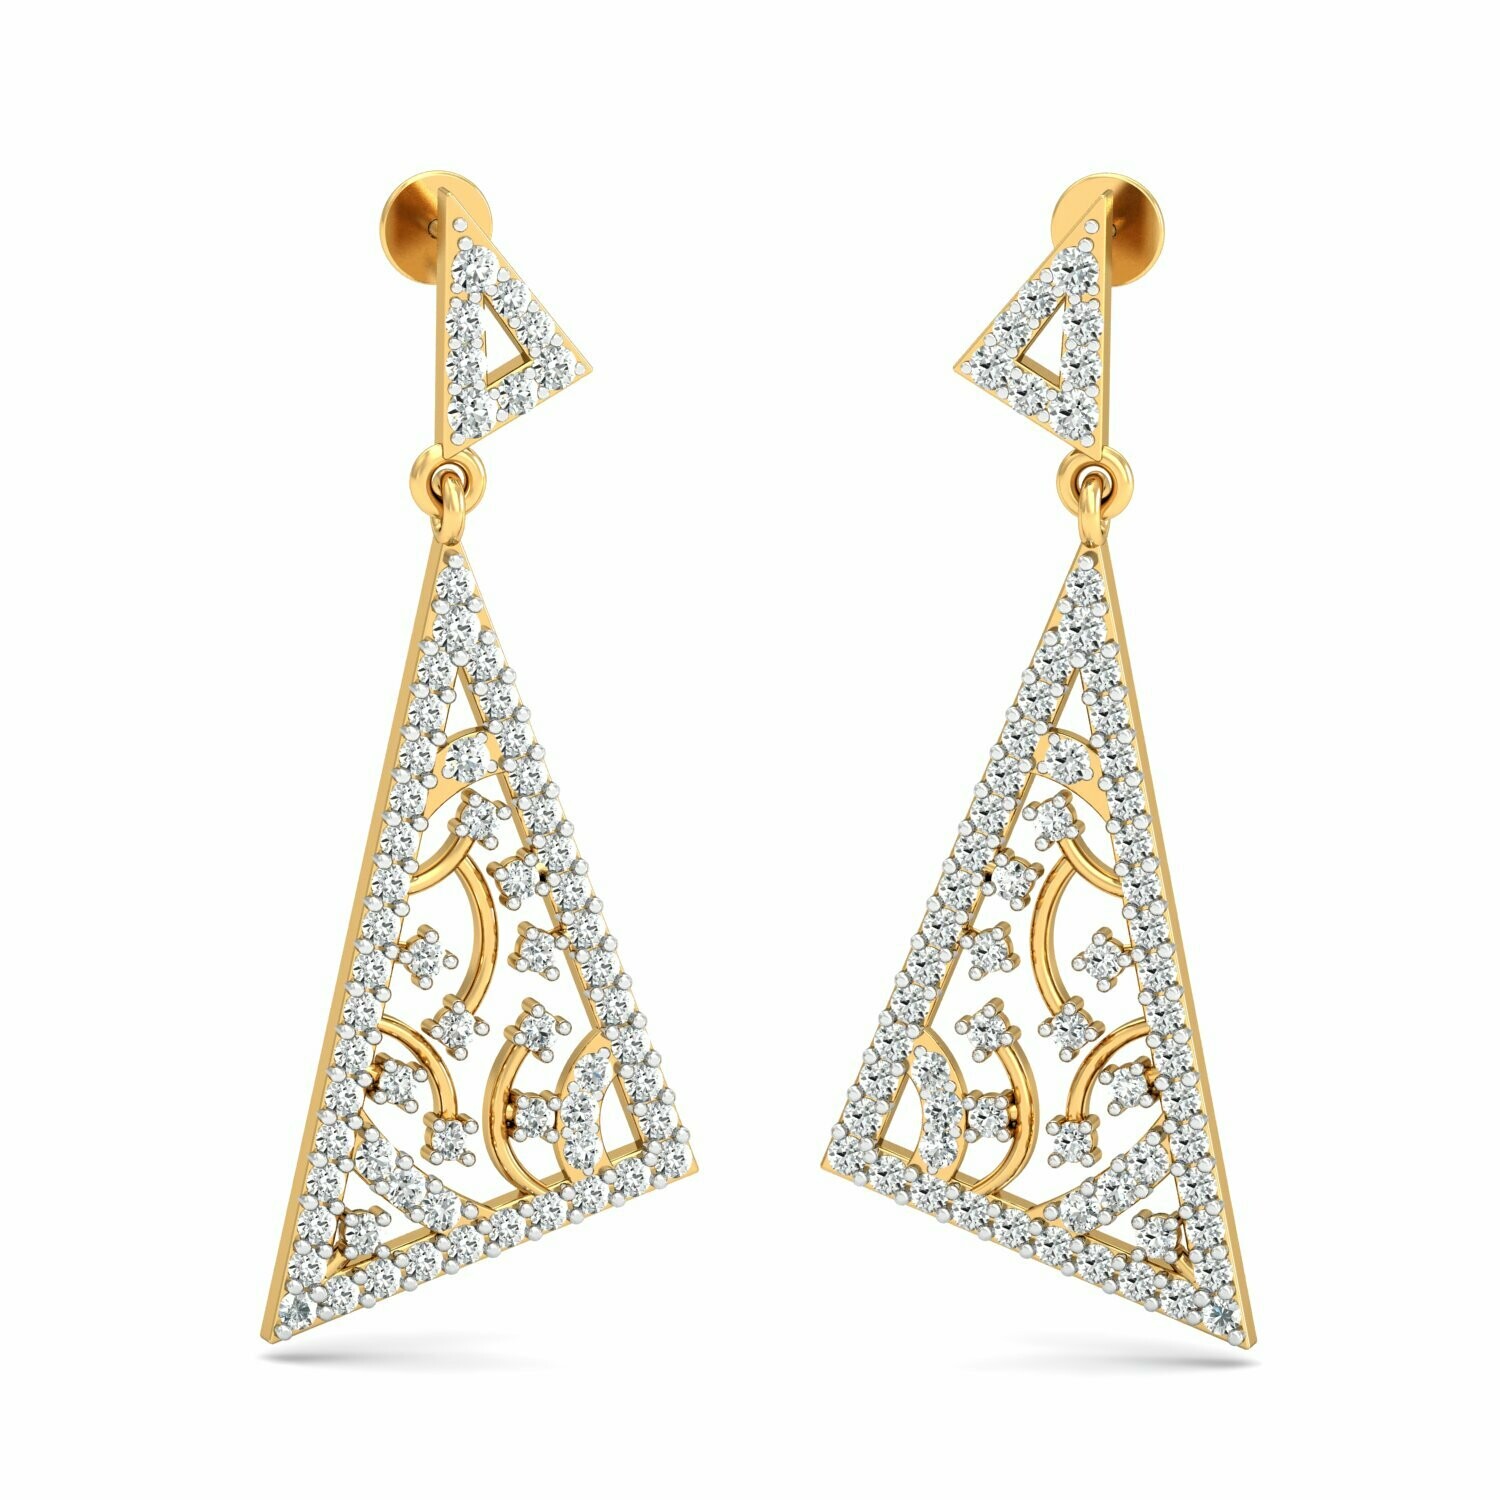 3D CAD jewelry model diamond earrings and pendant